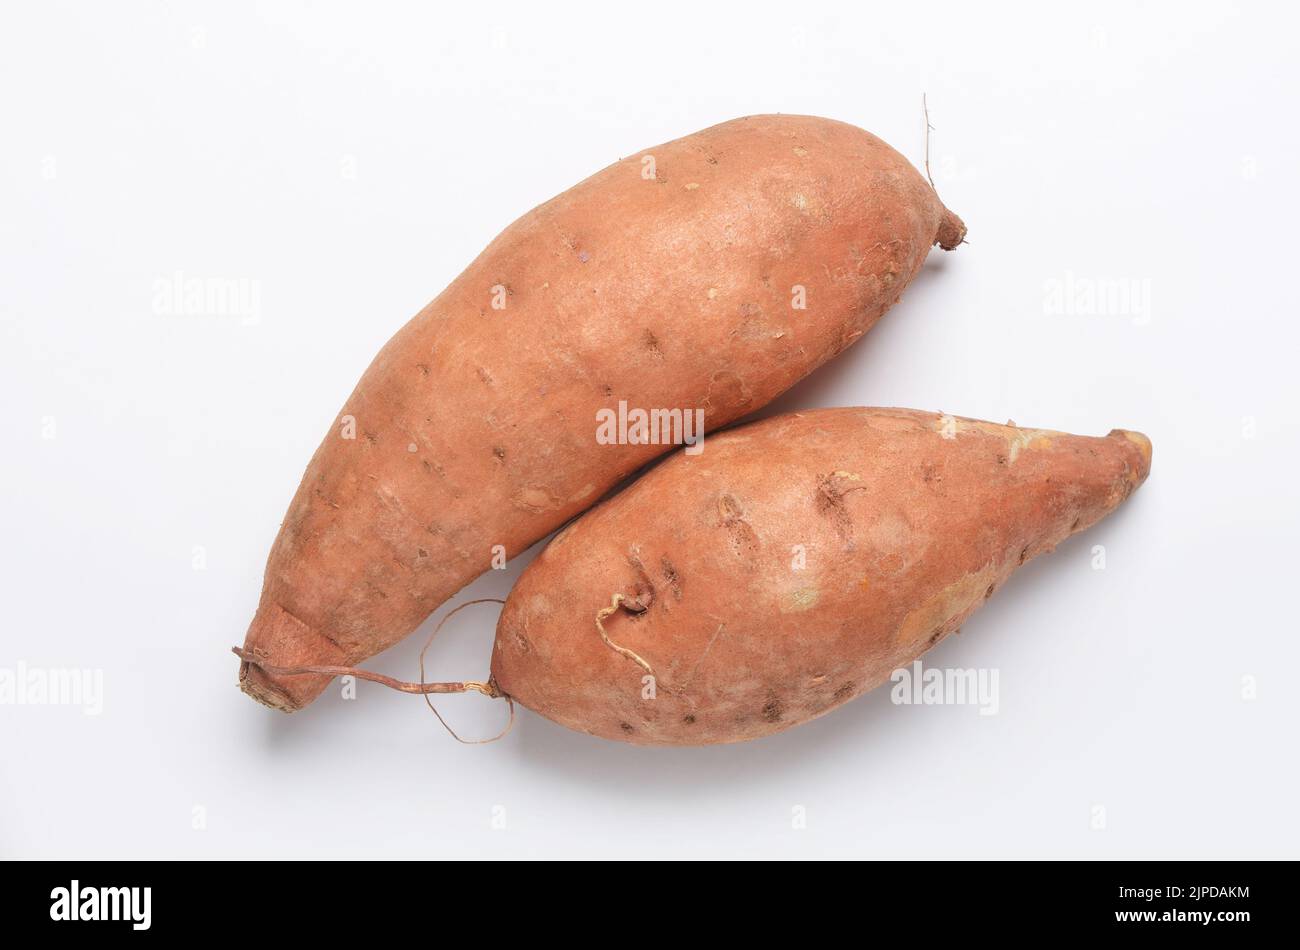 Two sweet potatoes Ipomoea batatas shot from directly above on white background Stock Photo